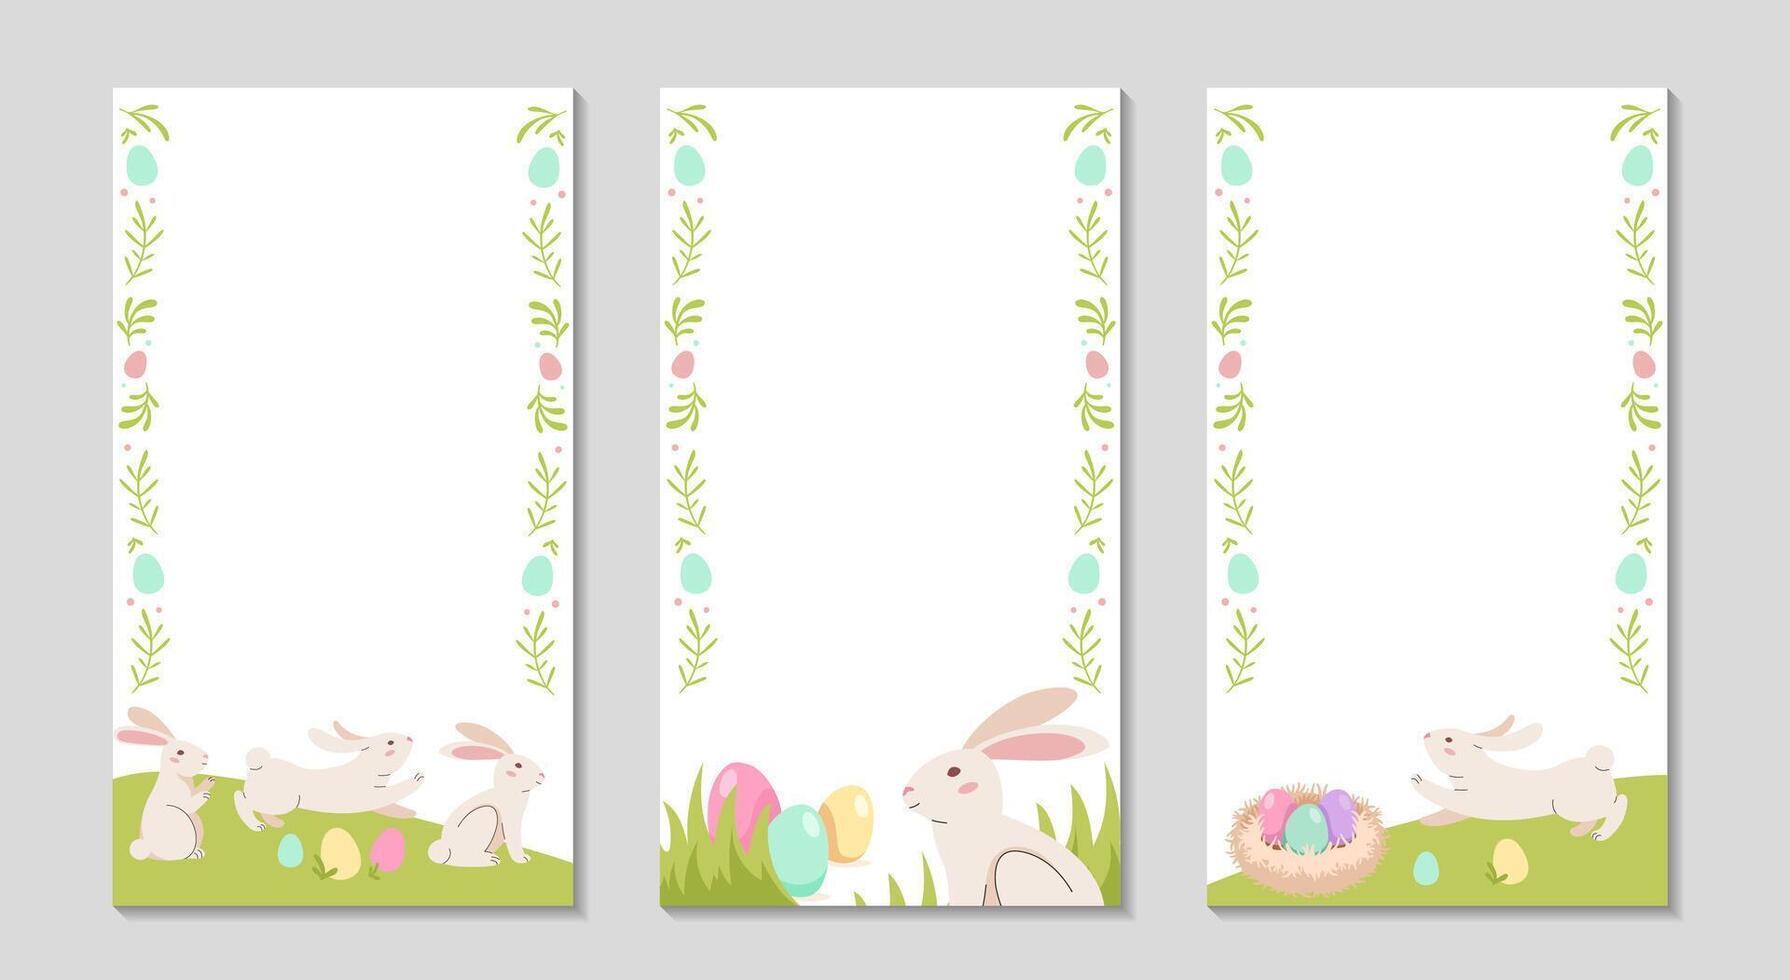 Happy Easter frame. For Social media long greeting stories post. Background with rabbit and eggs. Holidays vertical text templates set for photos and videos. Vector flat illustration.